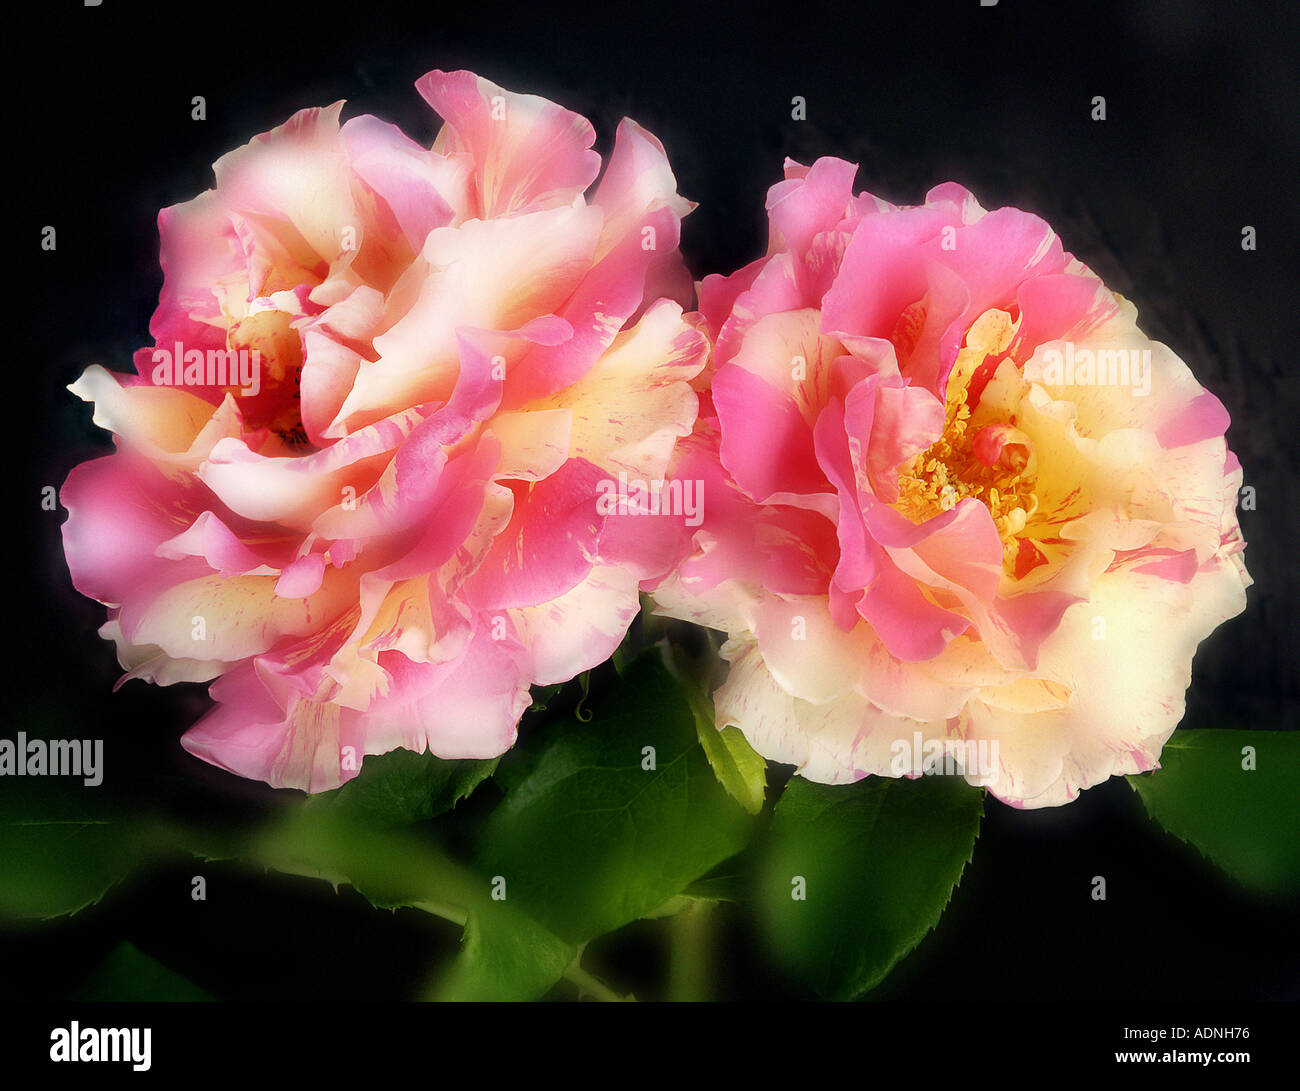 2 two white yellow pink red ROSE FLOWER BLOSSOM called CLAUDE MONET jacdesa Stock Photo